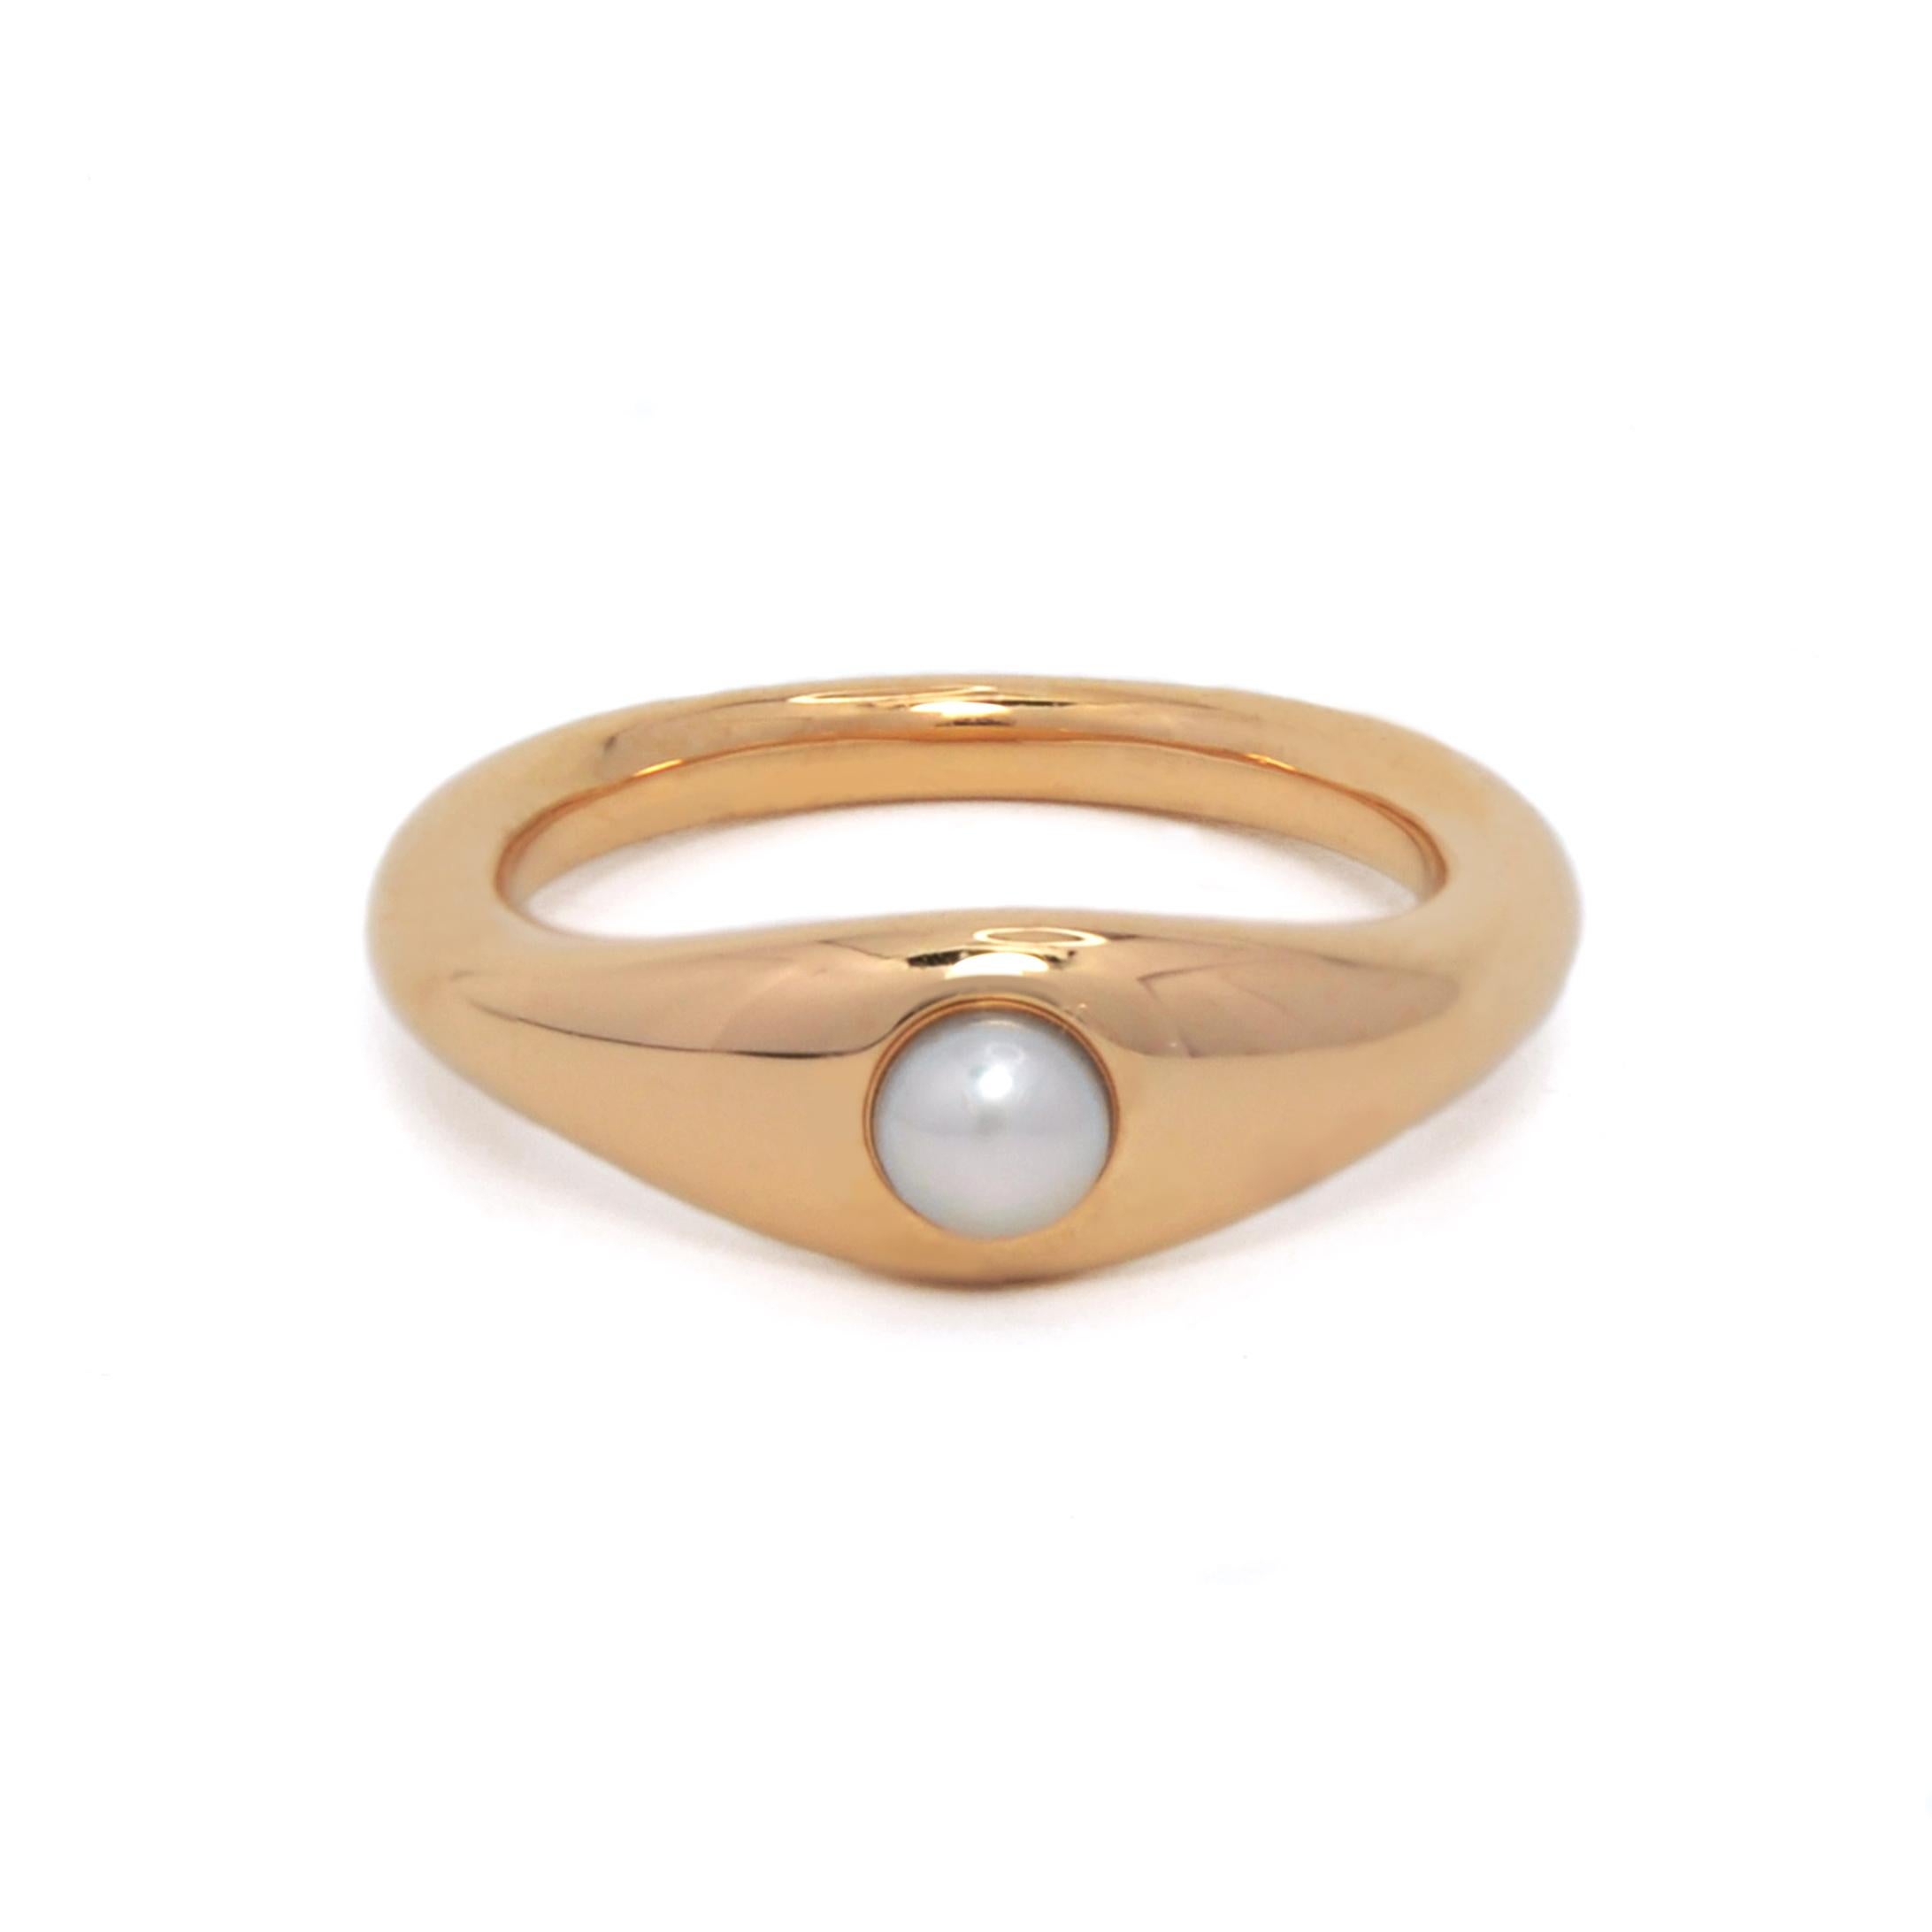 For Sale:  Ruth Nyc Lun Ring, 14k Yellow Gold and Pearl Ring 3